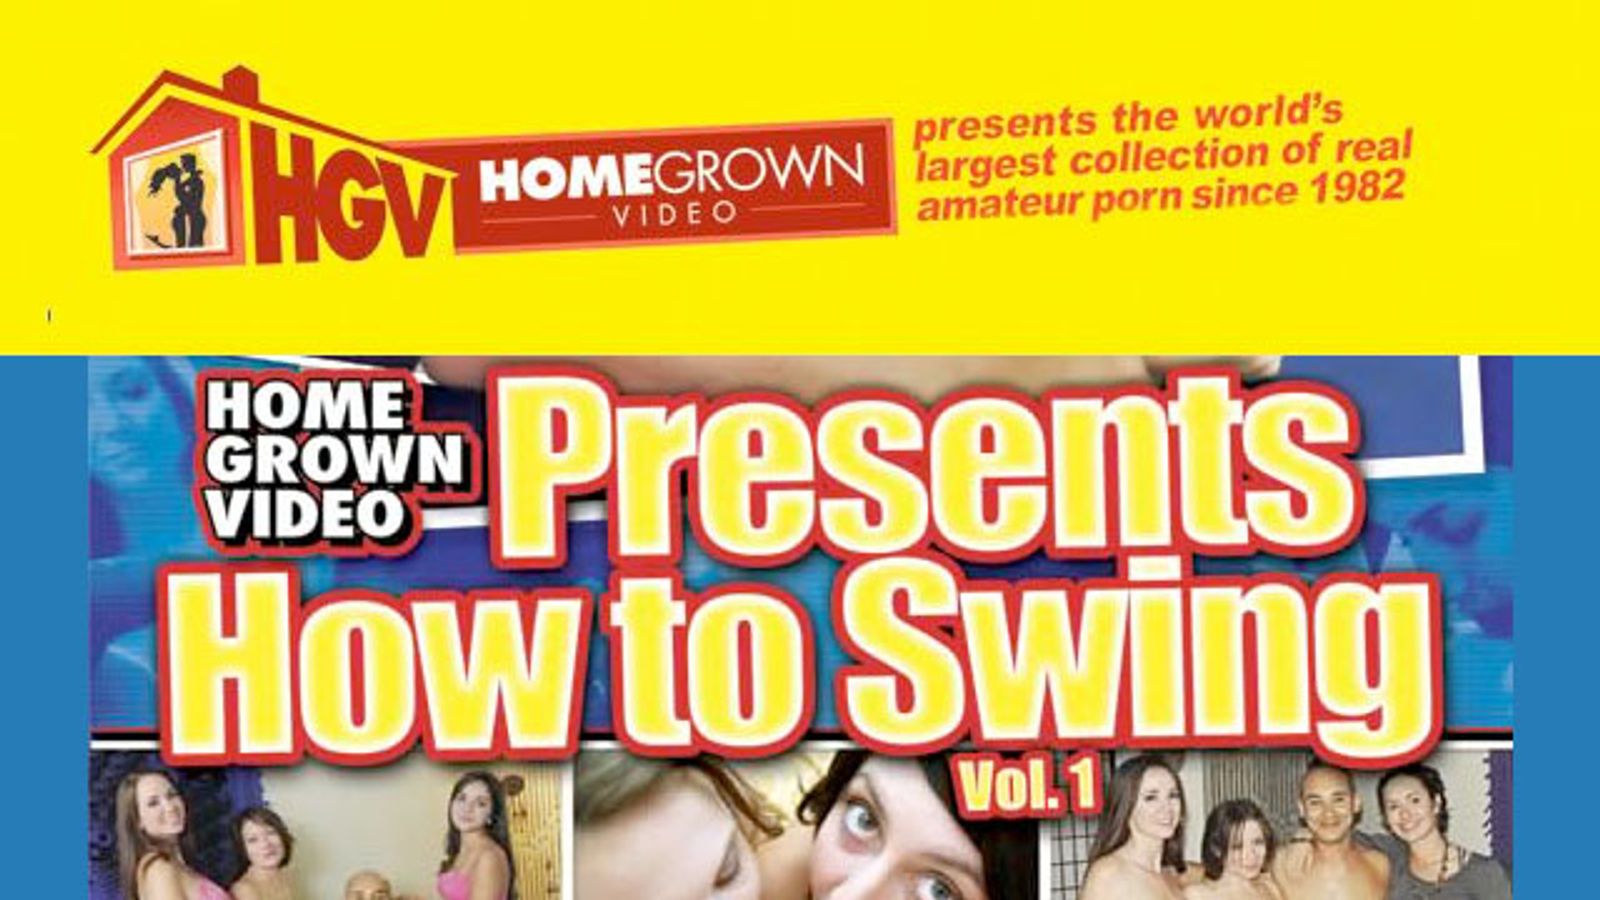 'Homegrown Video Presents How to Swing' Now on DVD